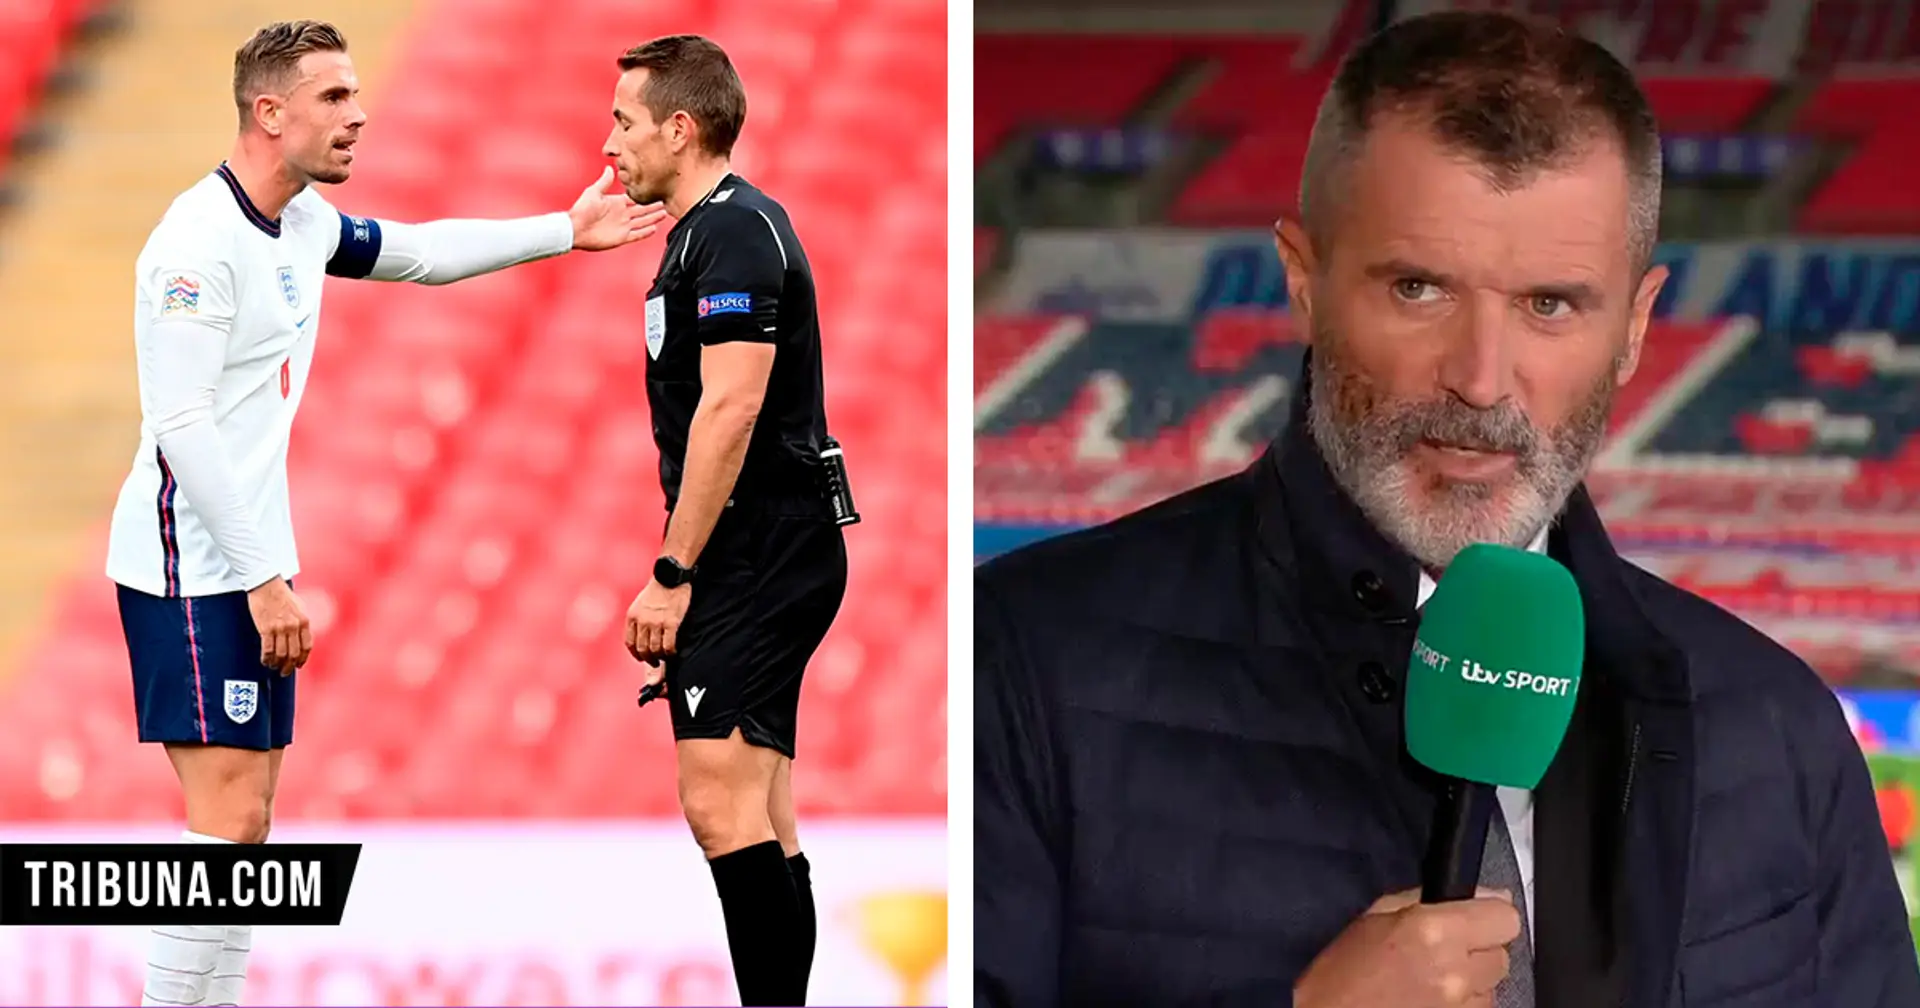 'How can player scream when he touches him on the shoulder?': Roy Keane criticises Jordan Henderson for winning soft penalty against Belgium